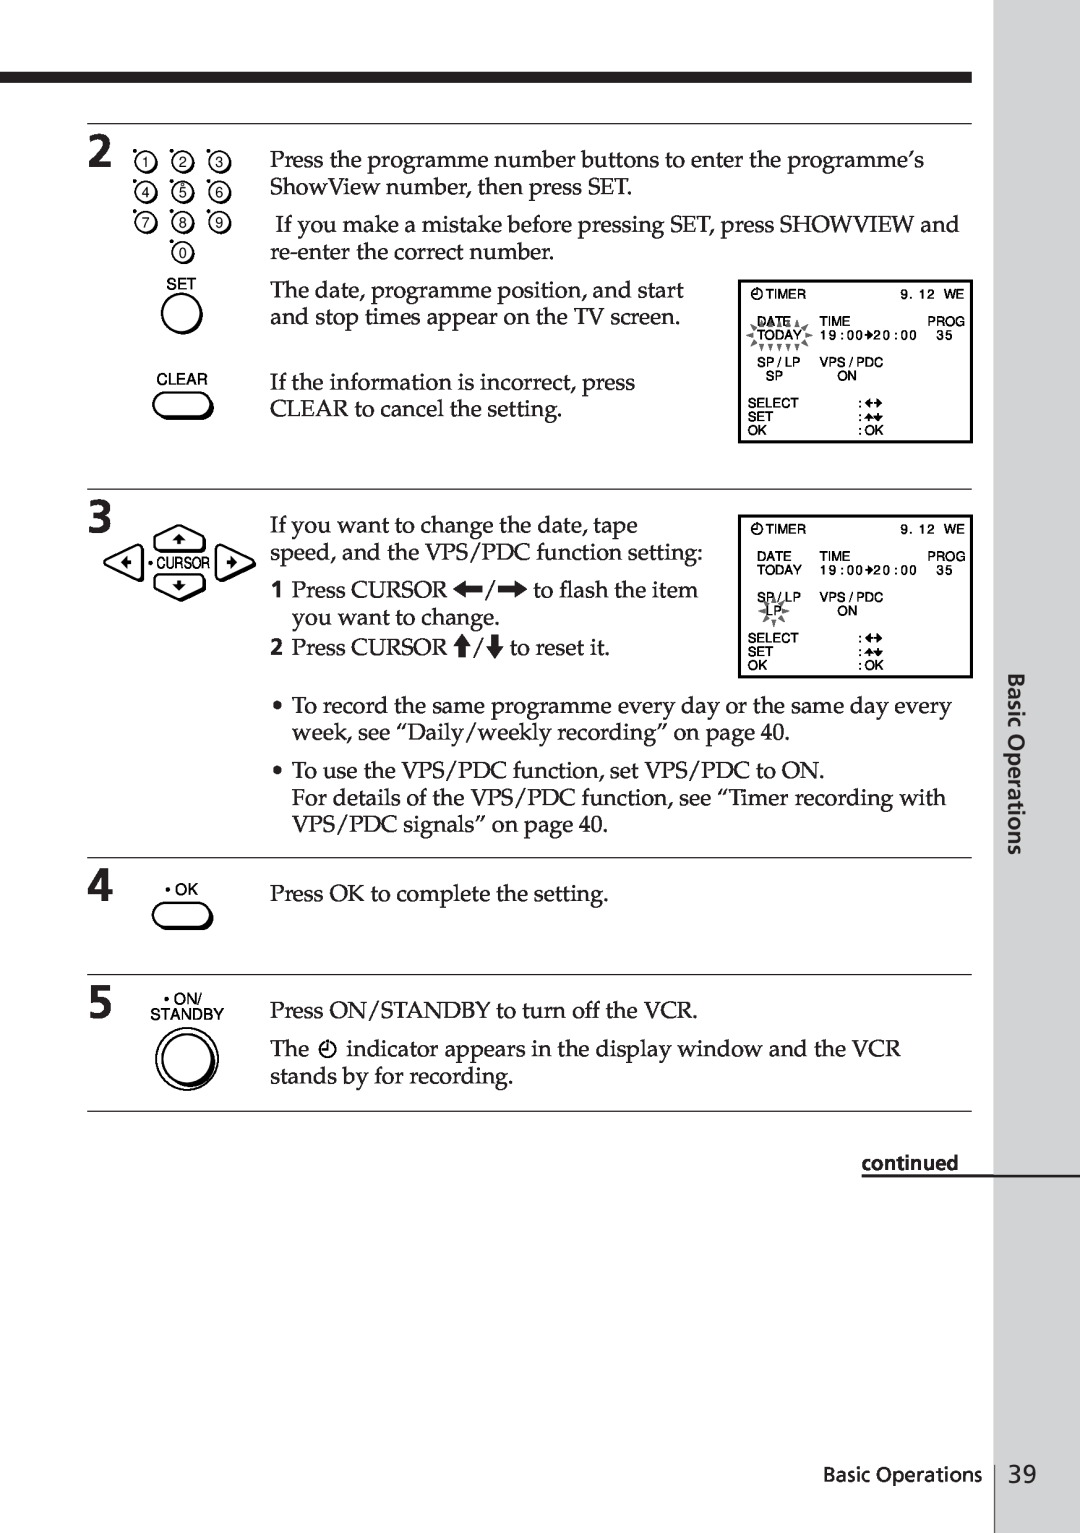 Sony SLV-E580EG manual If the information is incorrect, press CLEAR to cancel the setting, Basic Operations 